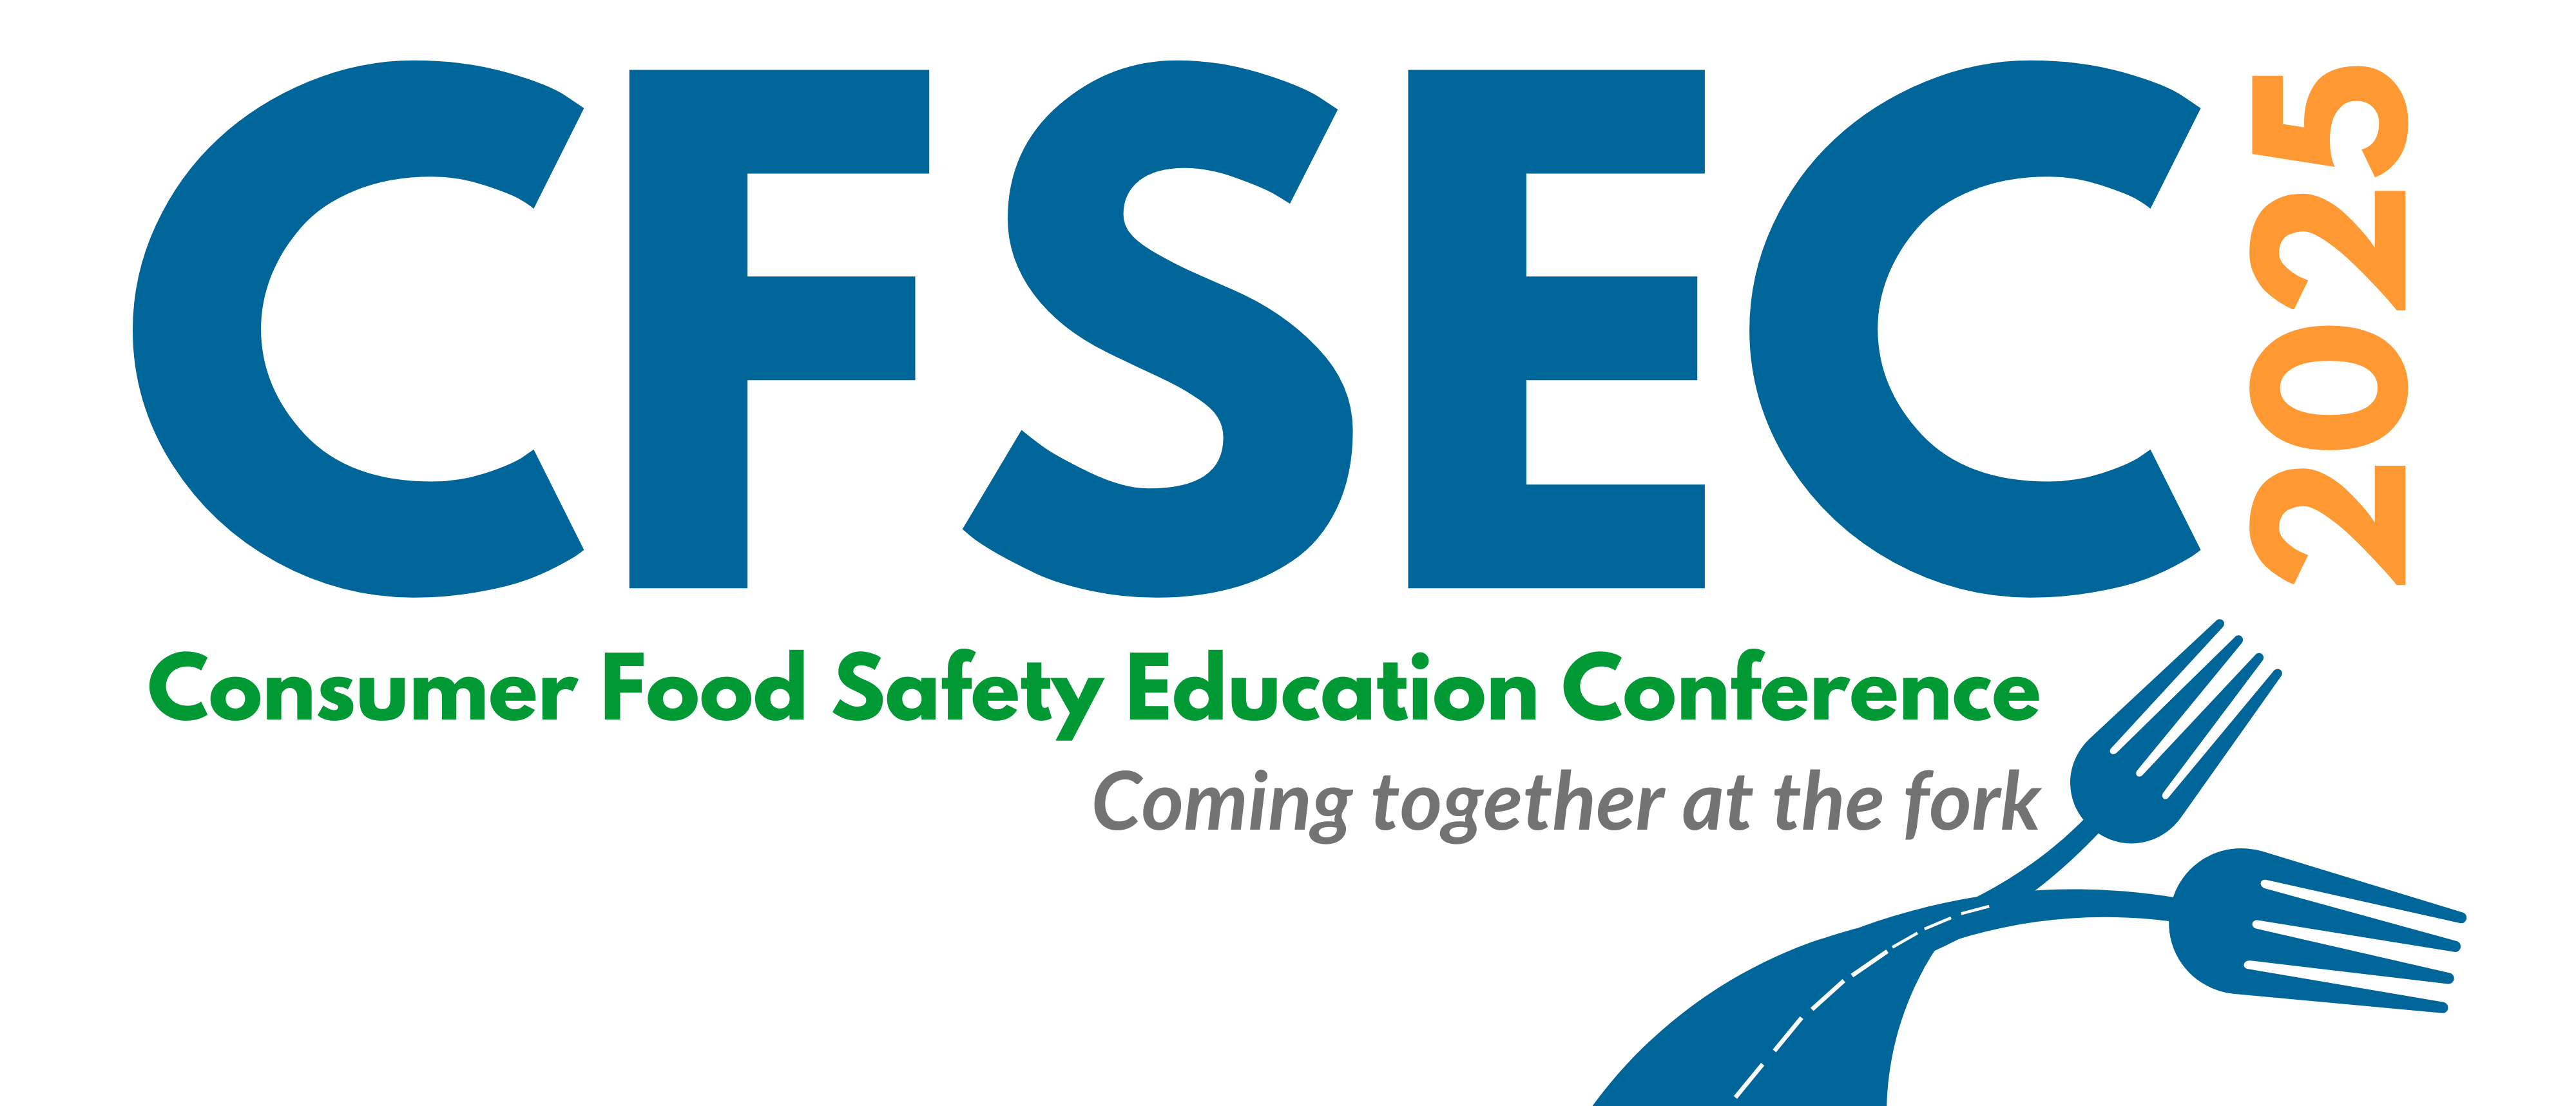 Consumer Food Safety Education Conference